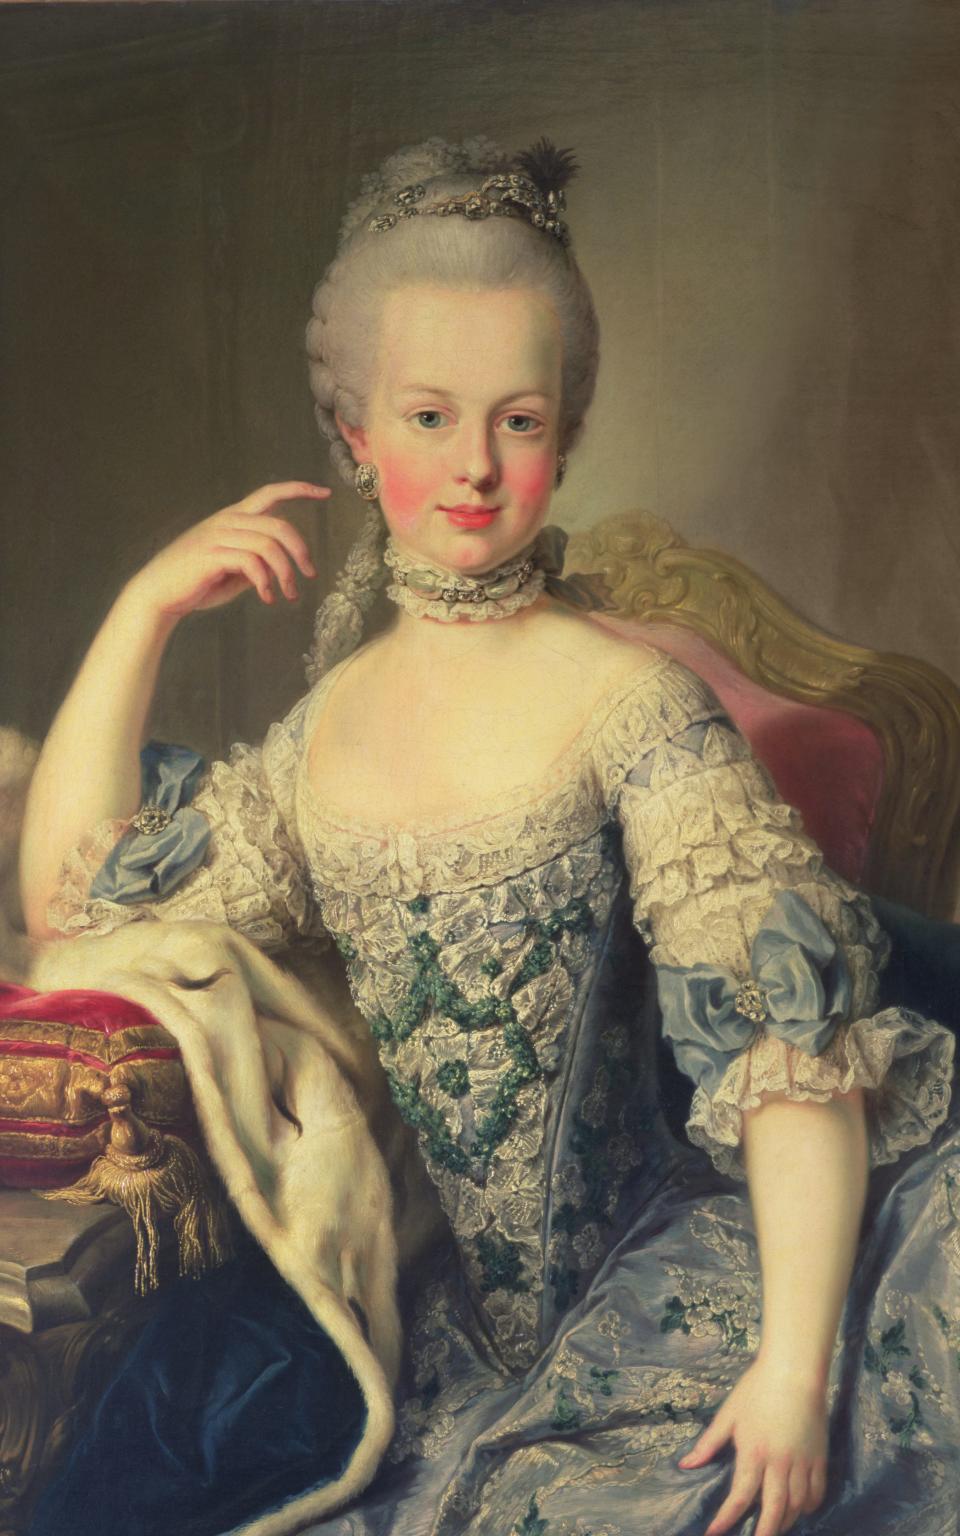 Marie Antoinette was renowned for her love of diamonds and pearls - This content is subject to copyright.